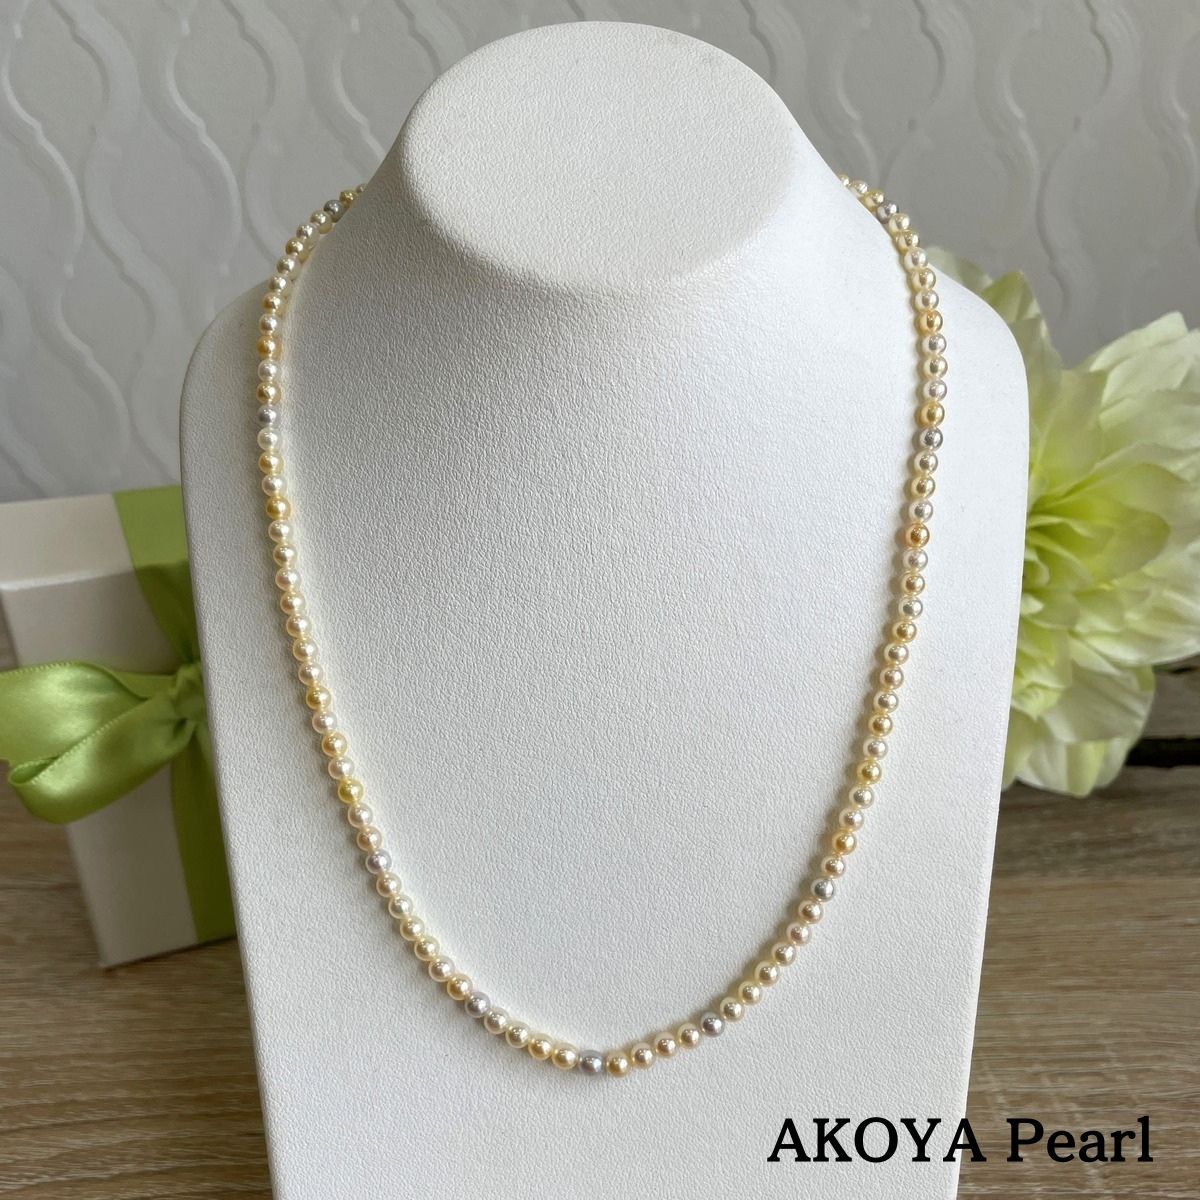 [AKOYA pearl] K18 babypearl necklace appropximately 40cm es-017